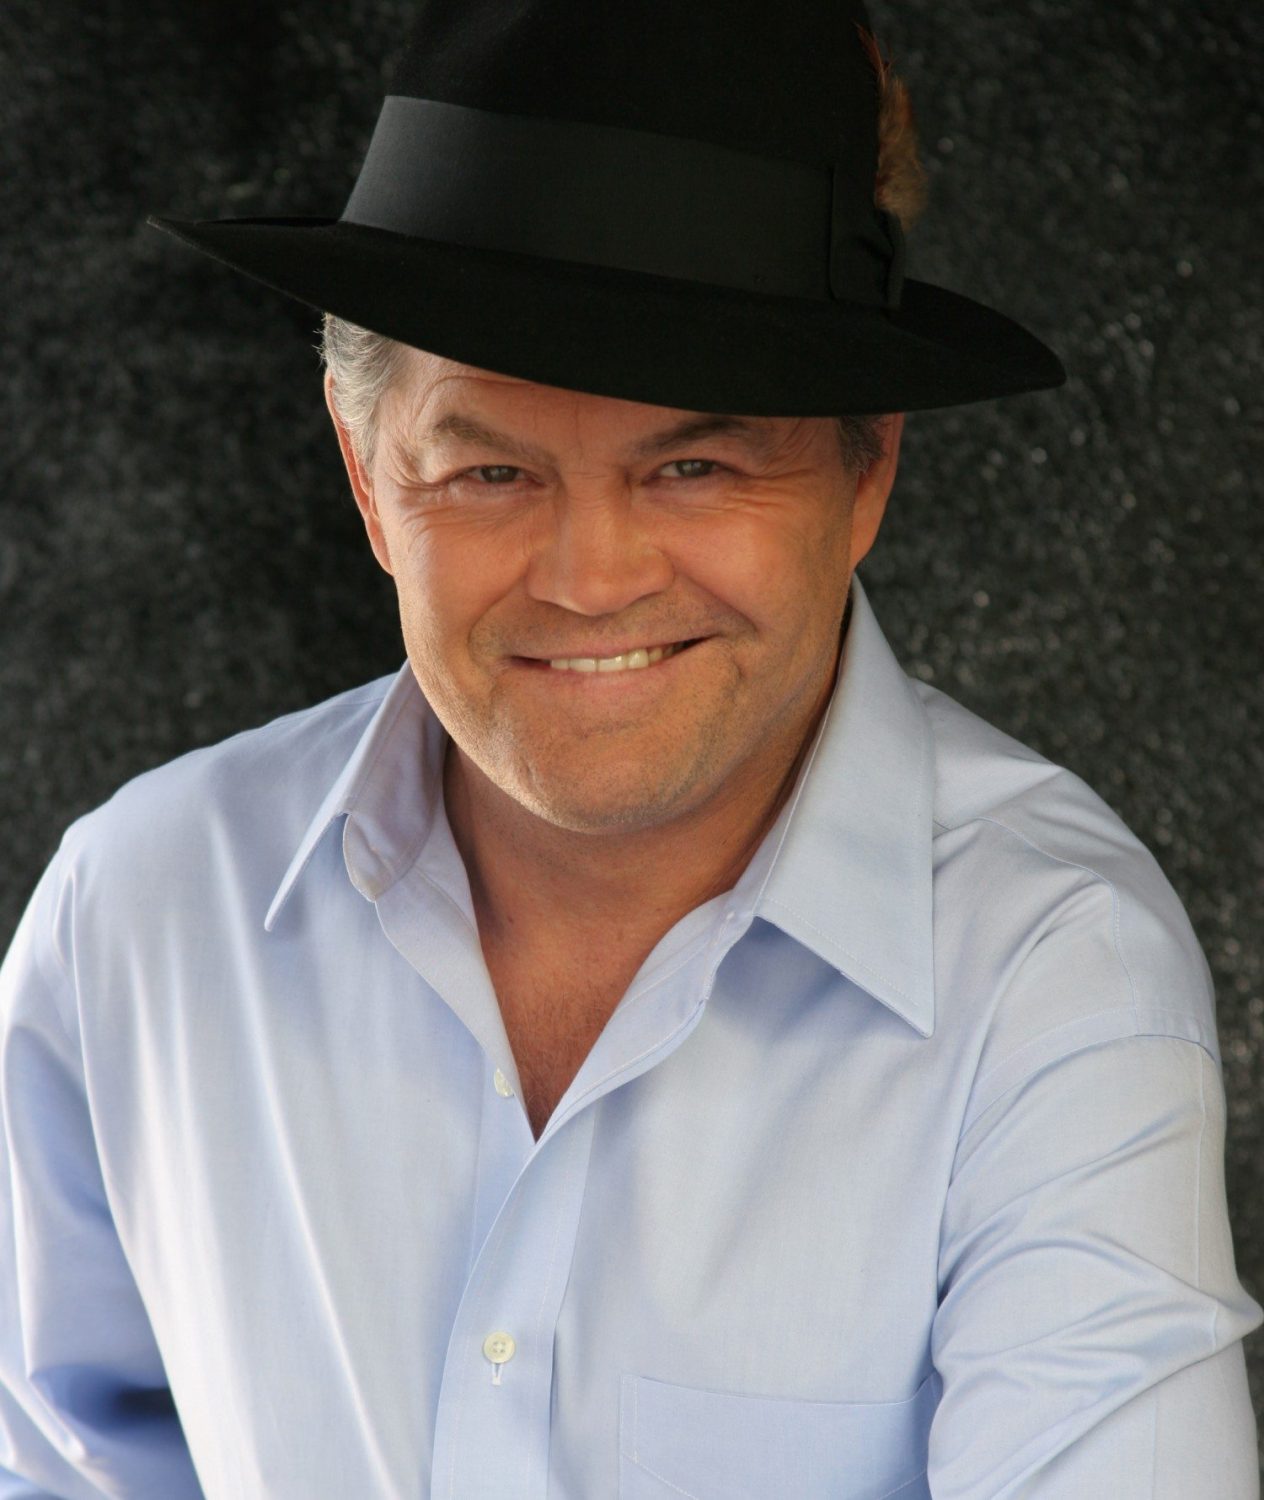 Micky Dolenz comes to B.B. King’s on Jan. 16, talks appearances with Peter Noone, The Monkees’ legacy and more